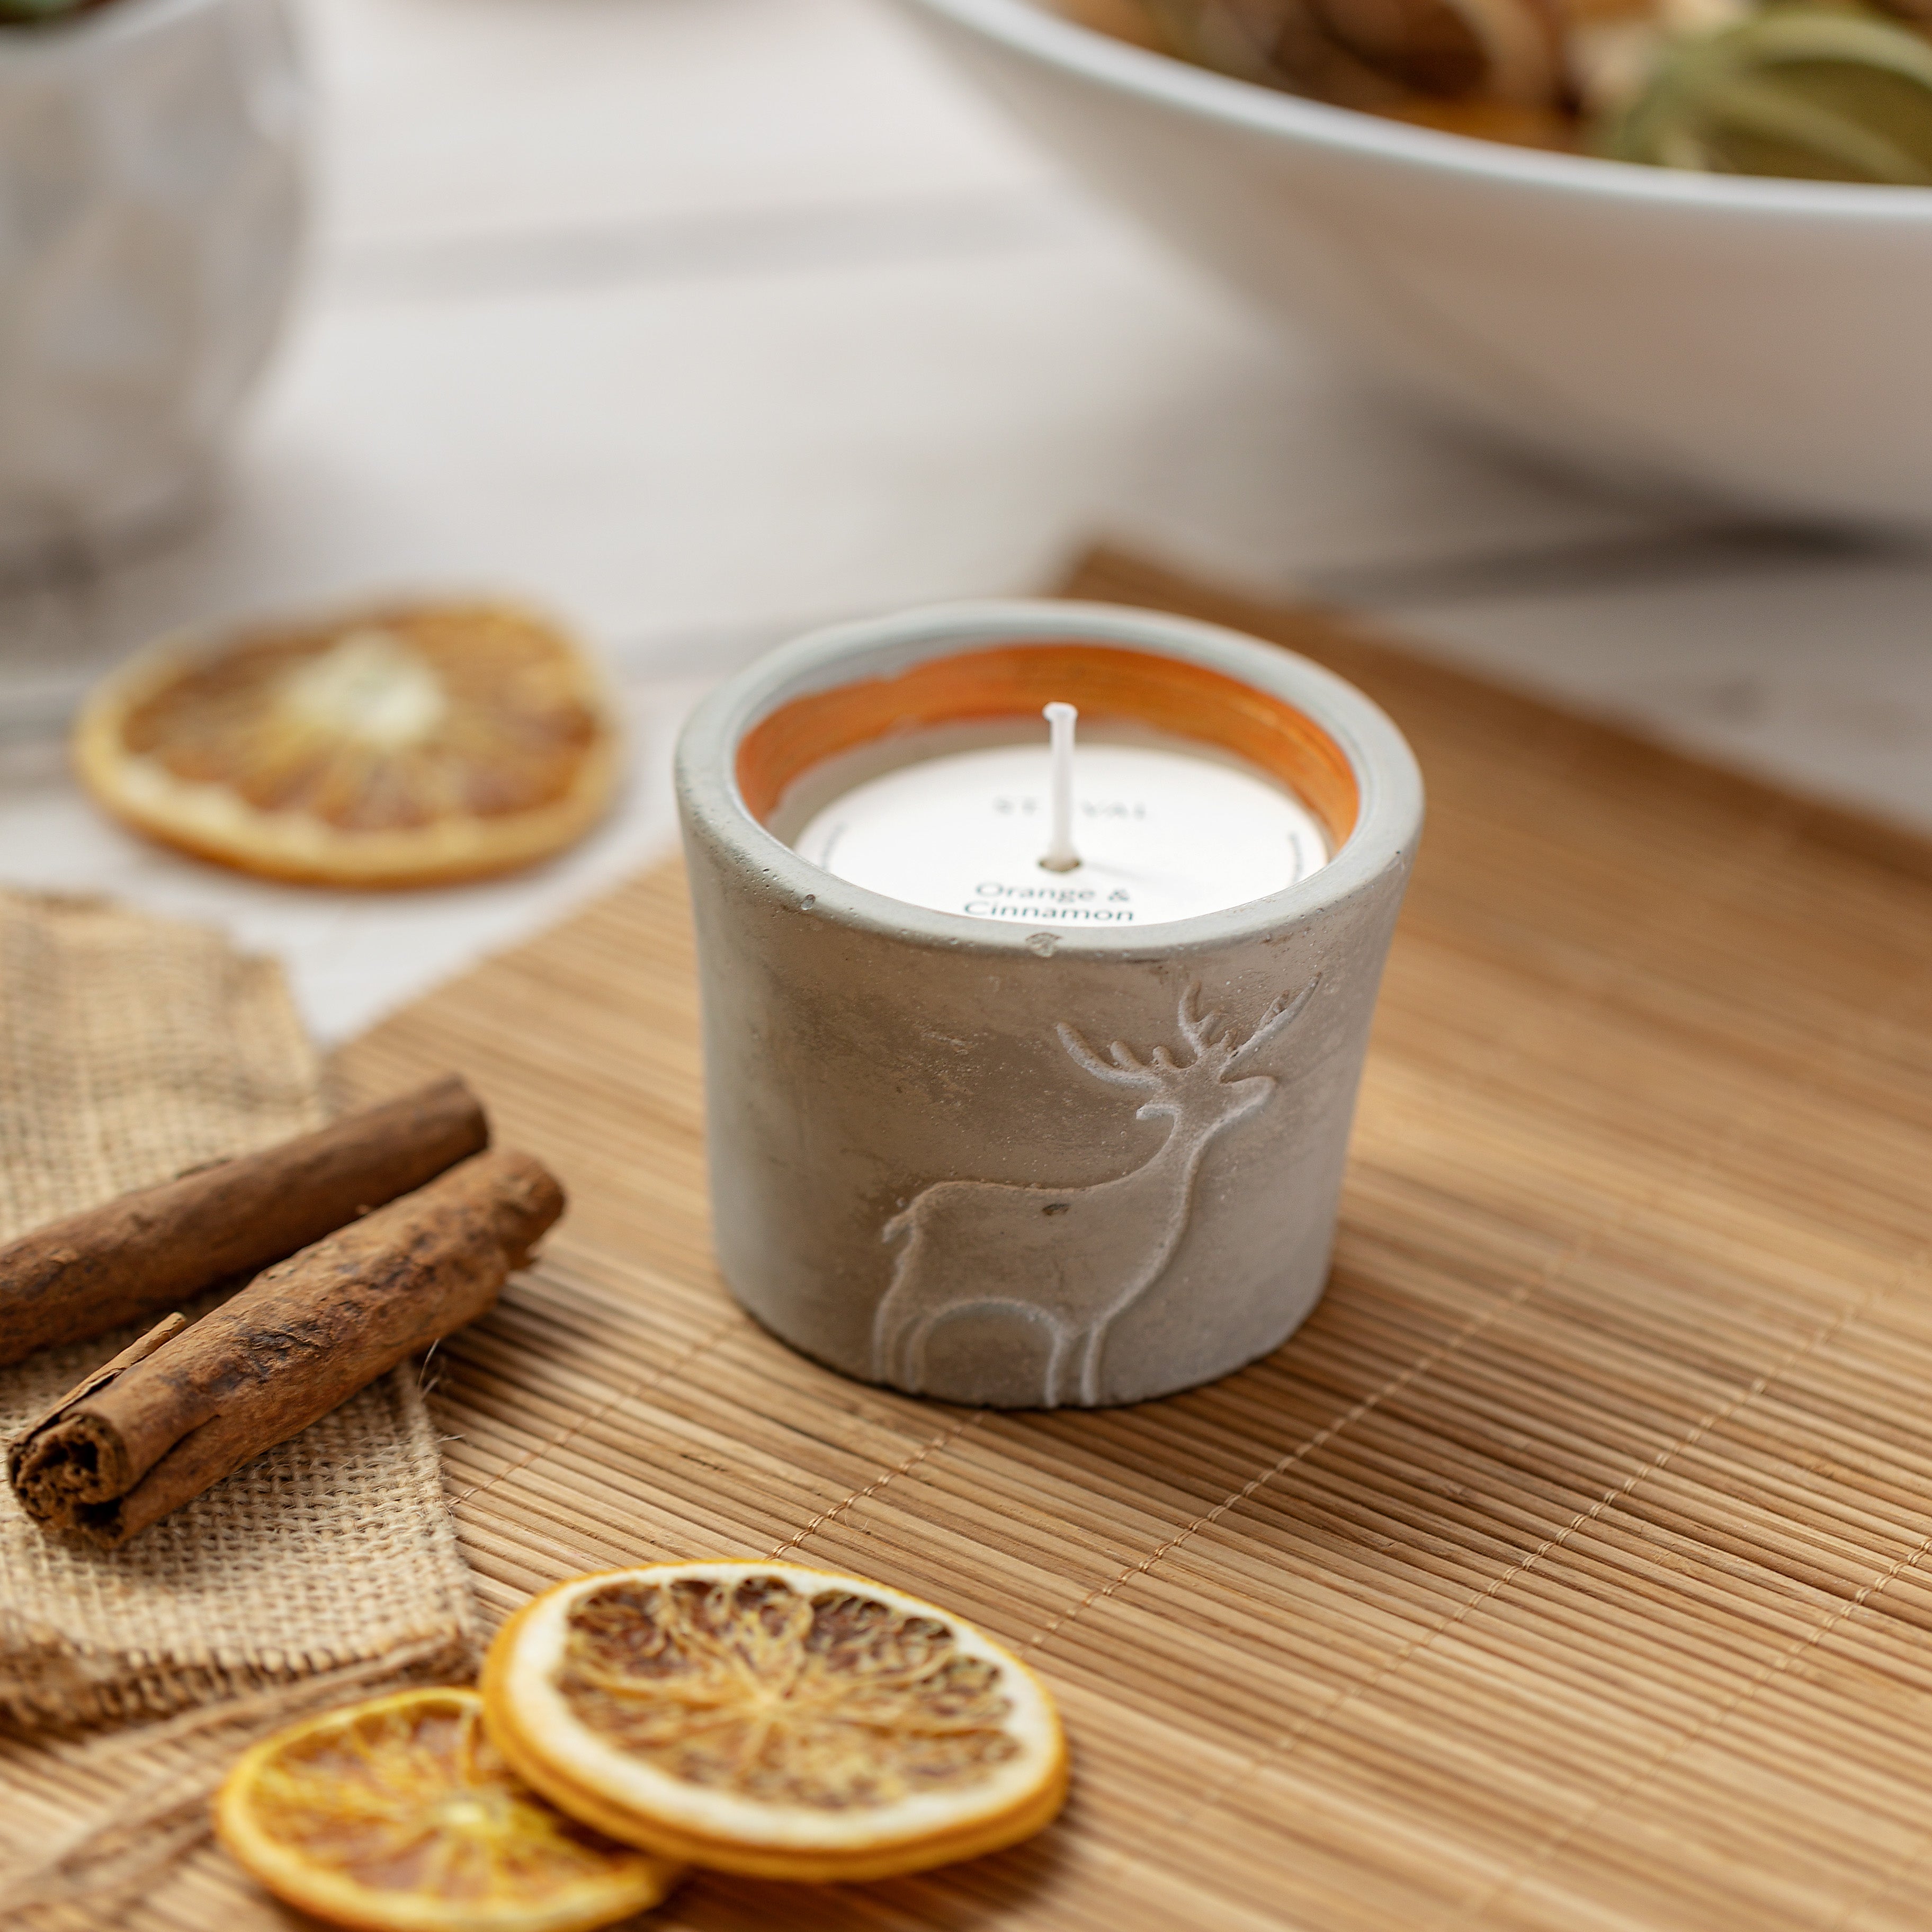 A grey candle pot with etched reindeer design on a Christmas table with dried orange slices and cinnamon sticks